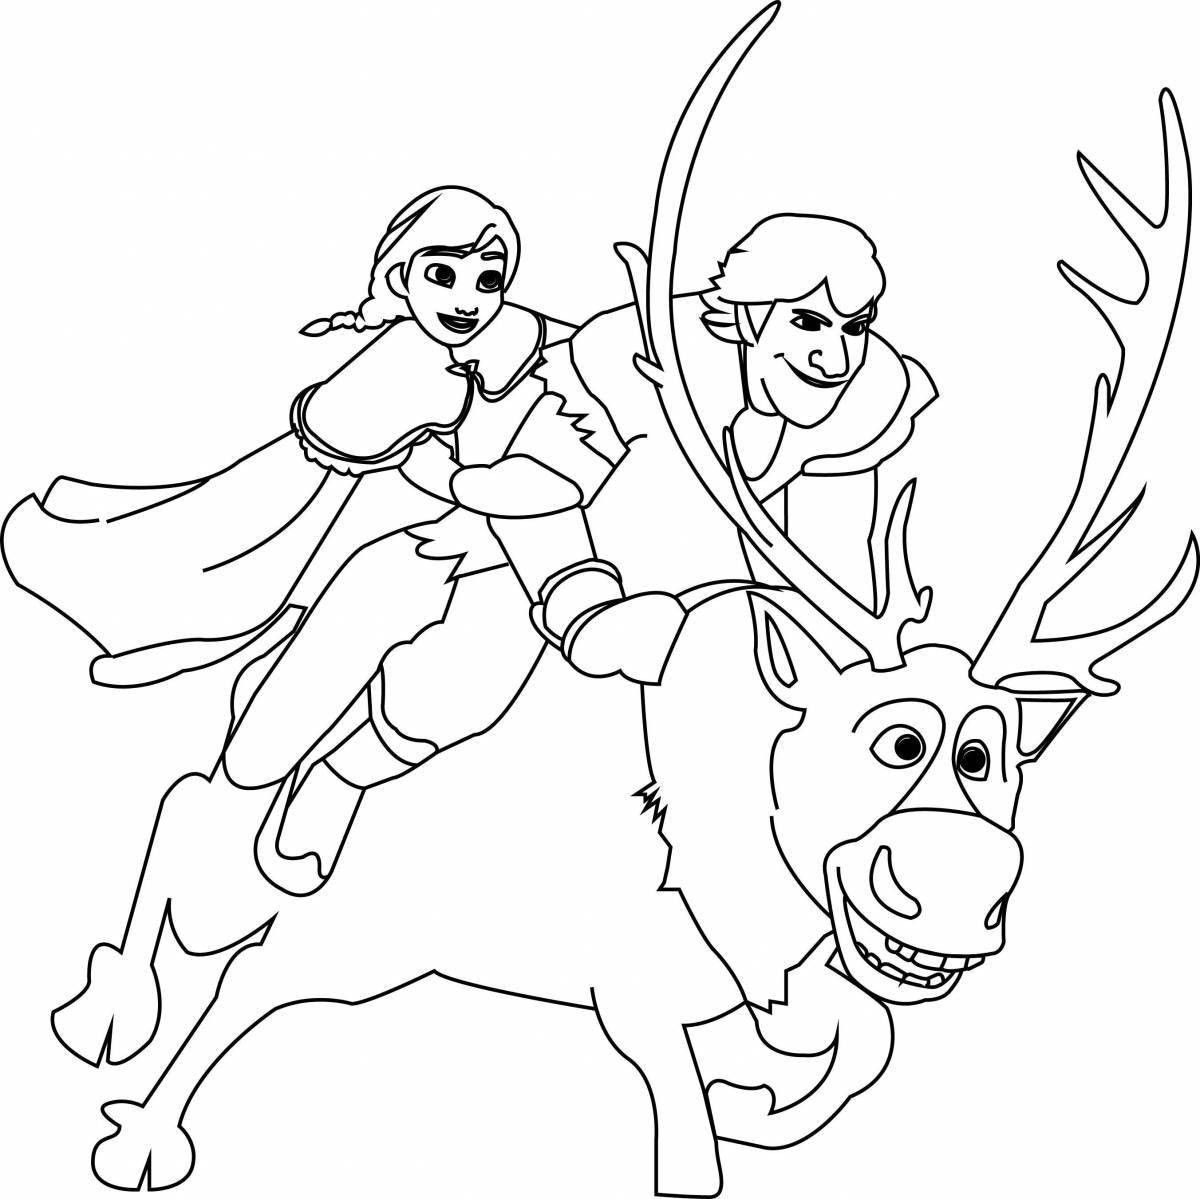 Colouring playful kristoff frozen